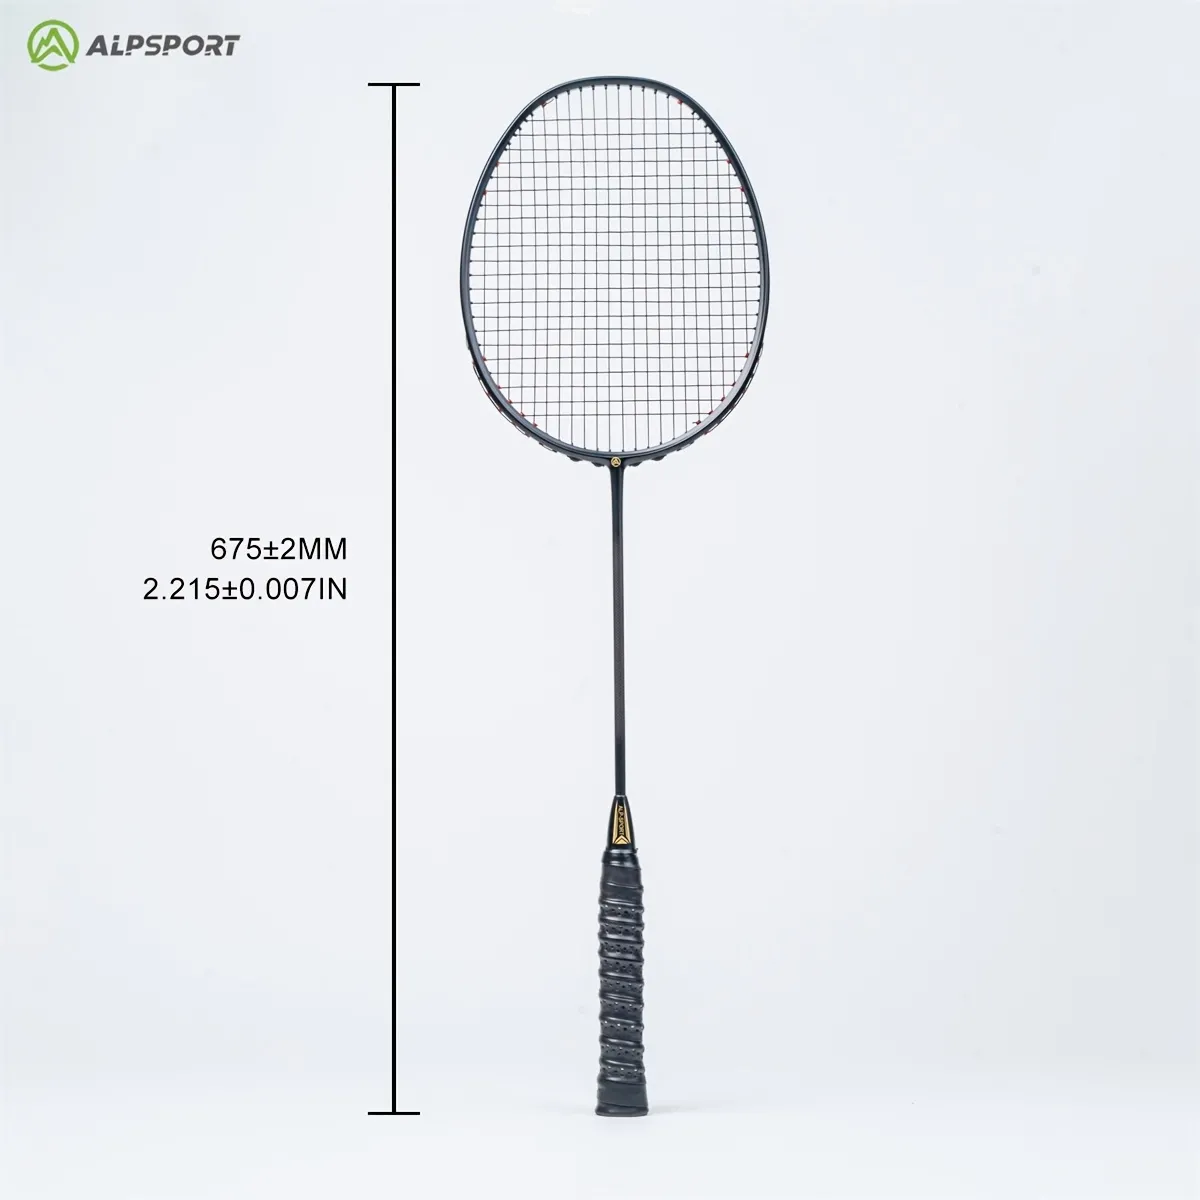 Alp Xhp 100% Carbon Fiber Badminton Racket - 6u, 30lbs Tension, Offensive and Defensive Single Channel Training Racket With Free String And Bag